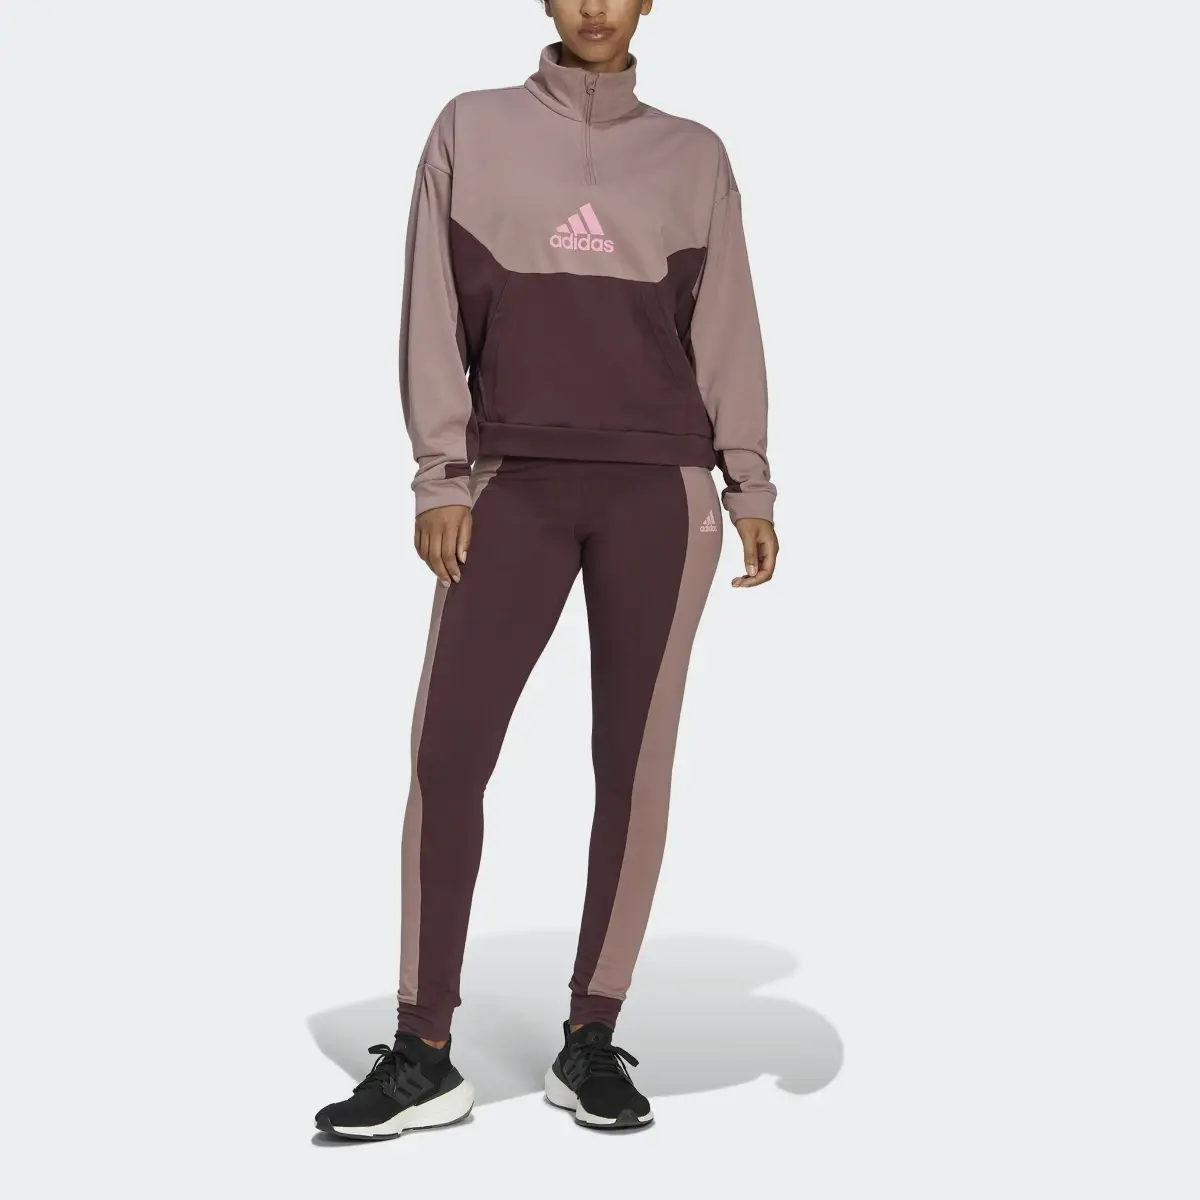 Adidas Half-Zip and Tights Track Suit. 1